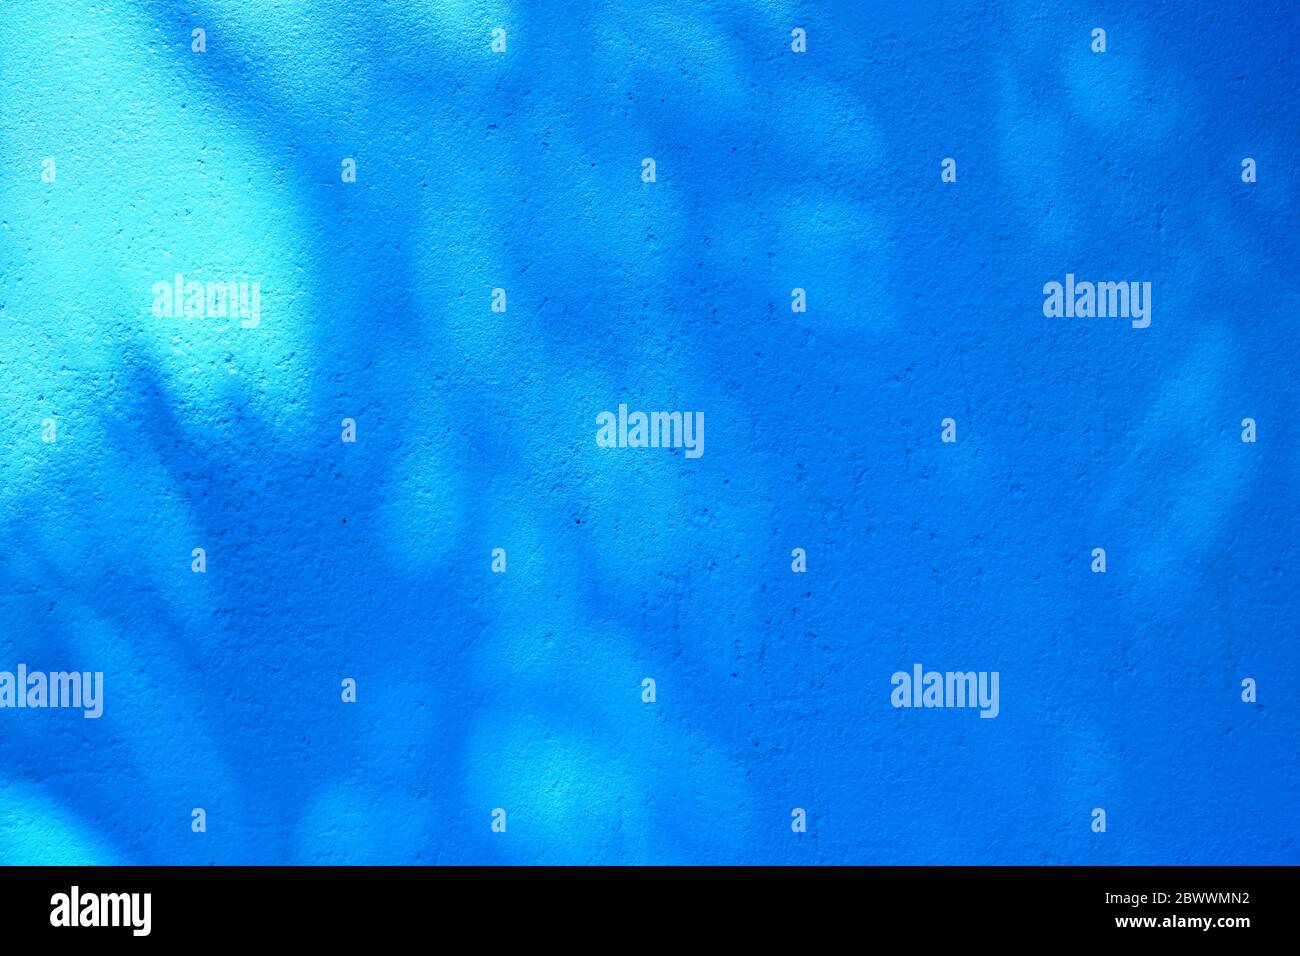 Shadow of Leaves on Blue Painting Concrete Wall Background. Stock Photo